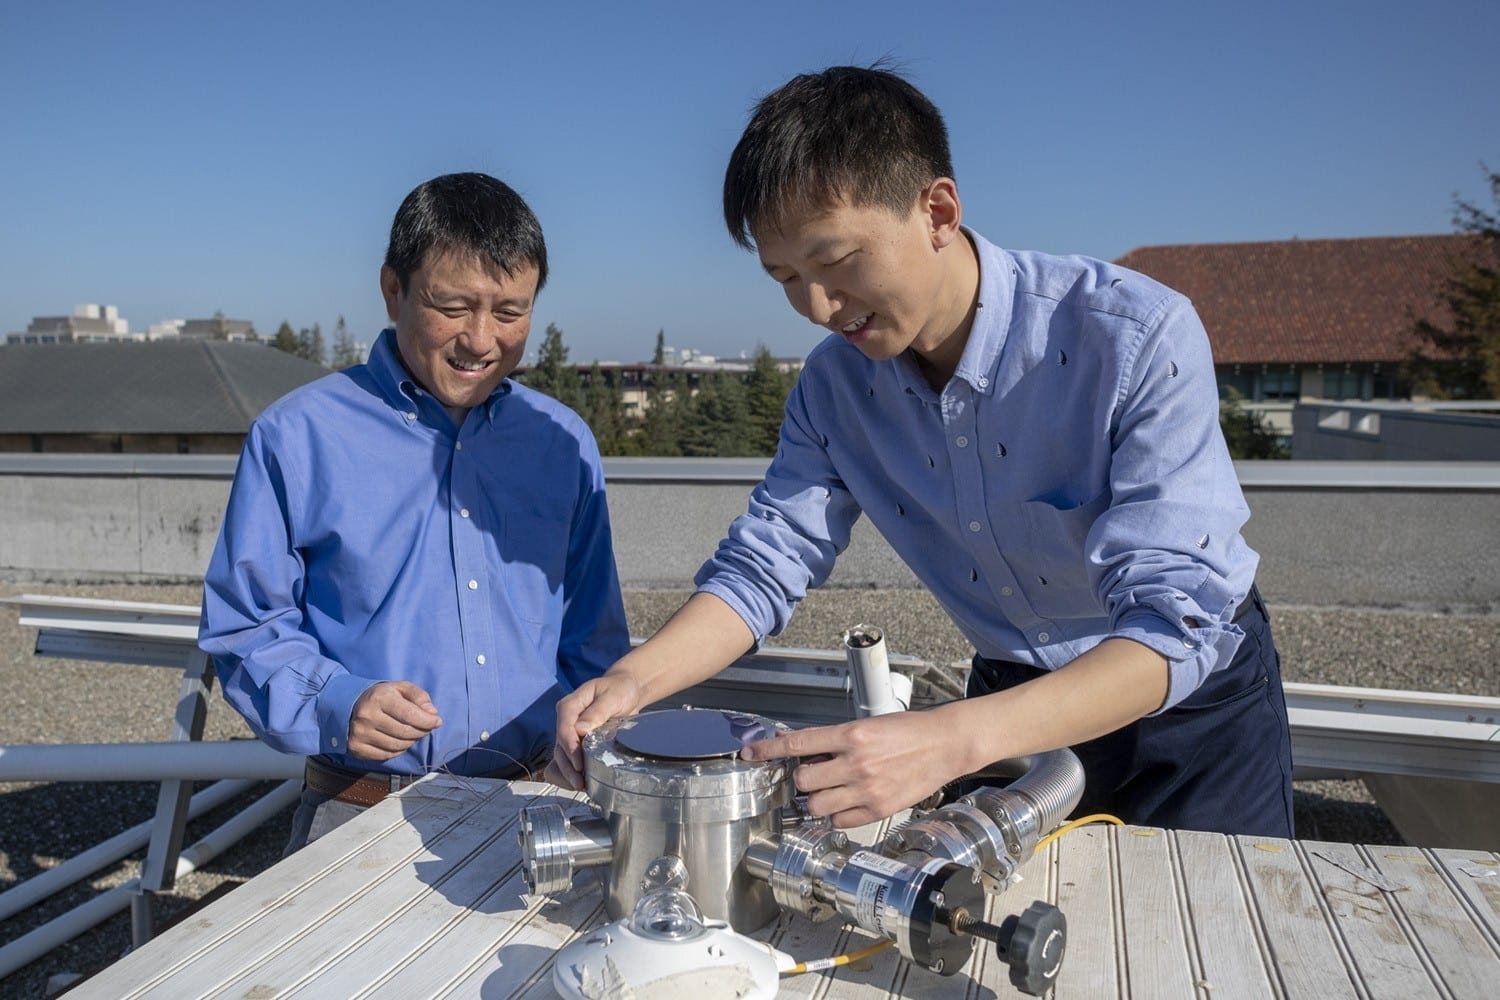 A rooftop device that can make solar power and cool buildings at the same time